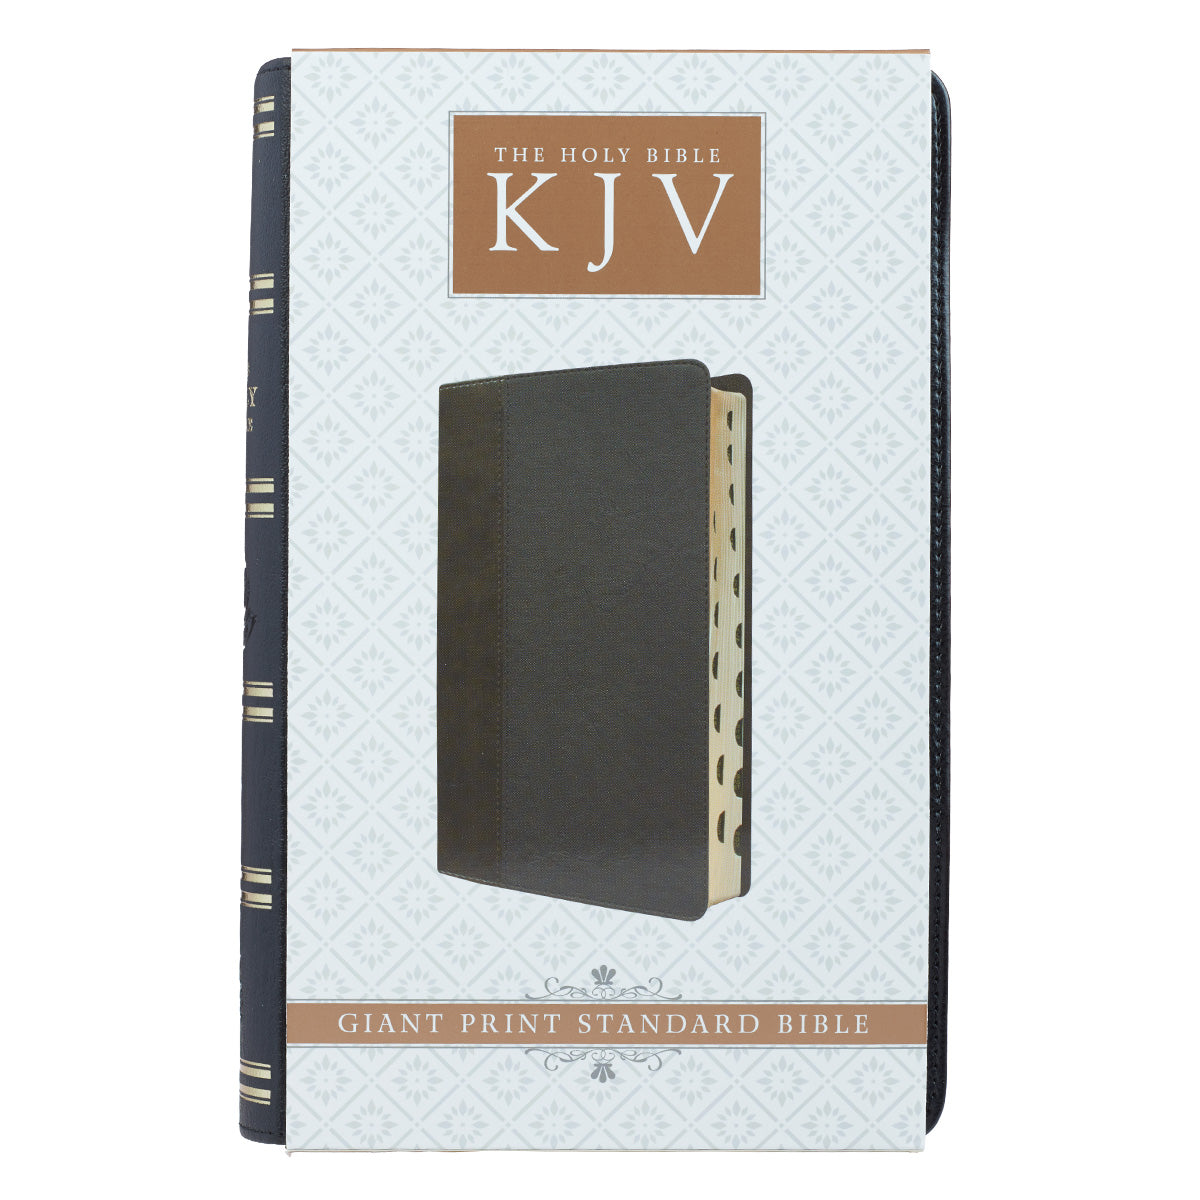 Image of KJV Giant Print Bible, Black, Imitation Leather, Gilt Edging, Ribbon Marker, Presentation Page, Concordance, Colour Maps, Cross-Referencing, Thumb Index other